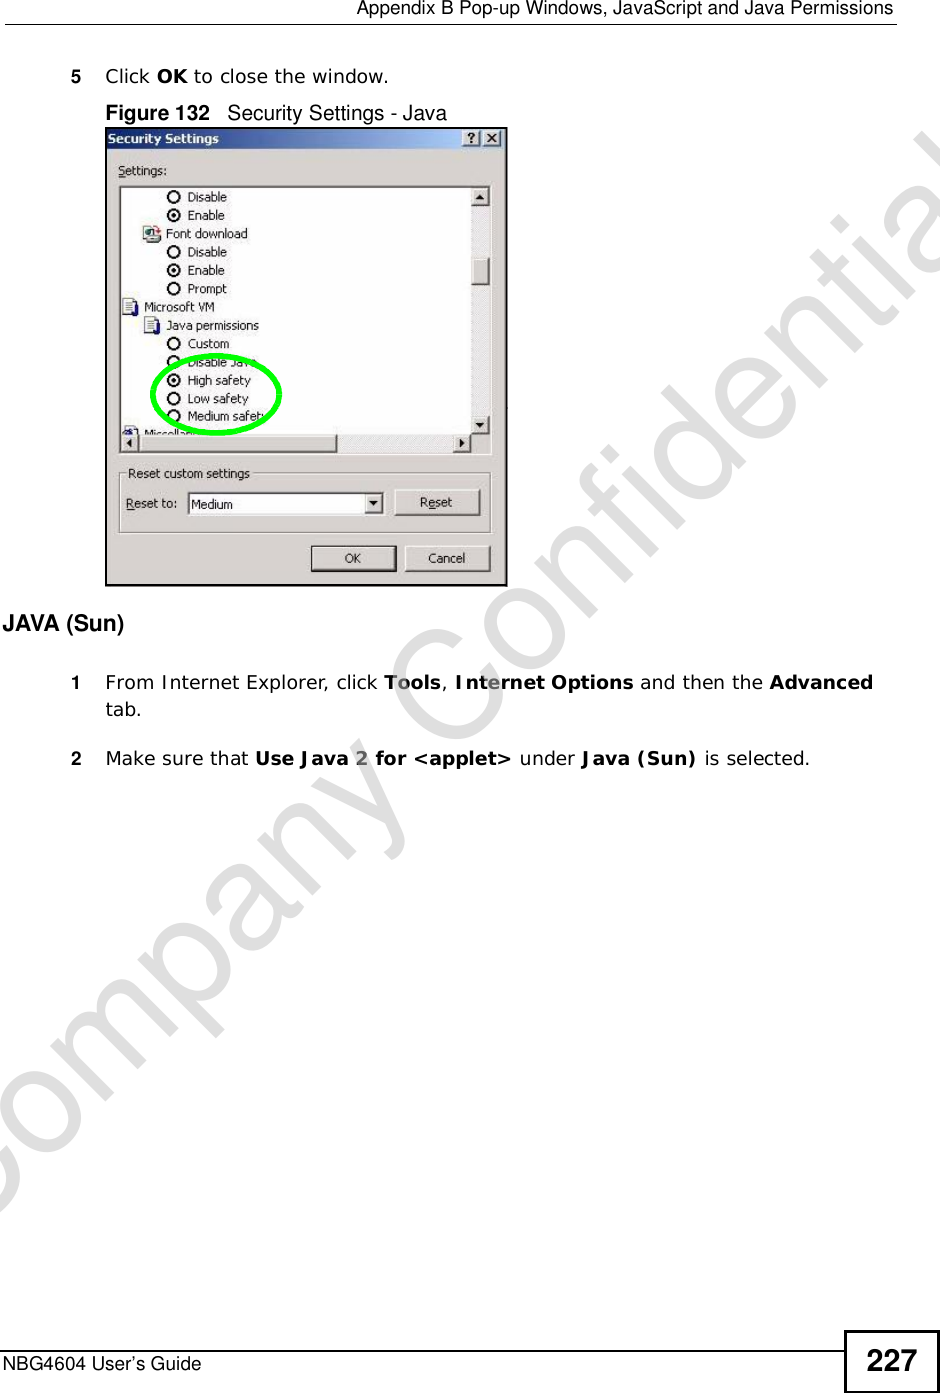  Appendix BPop-up Windows, JavaScript and Java PermissionsNBG4604 User’s Guide 2275Click OK to close the window.Figure 132   Security Settings - Java JAVA (Sun)1From Internet Explorer, click Tools,Internet Options and then the Advancedtab. 2Make sure that Use Java 2 for &lt;applet&gt; under Java (Sun) is selected.Company Confidential